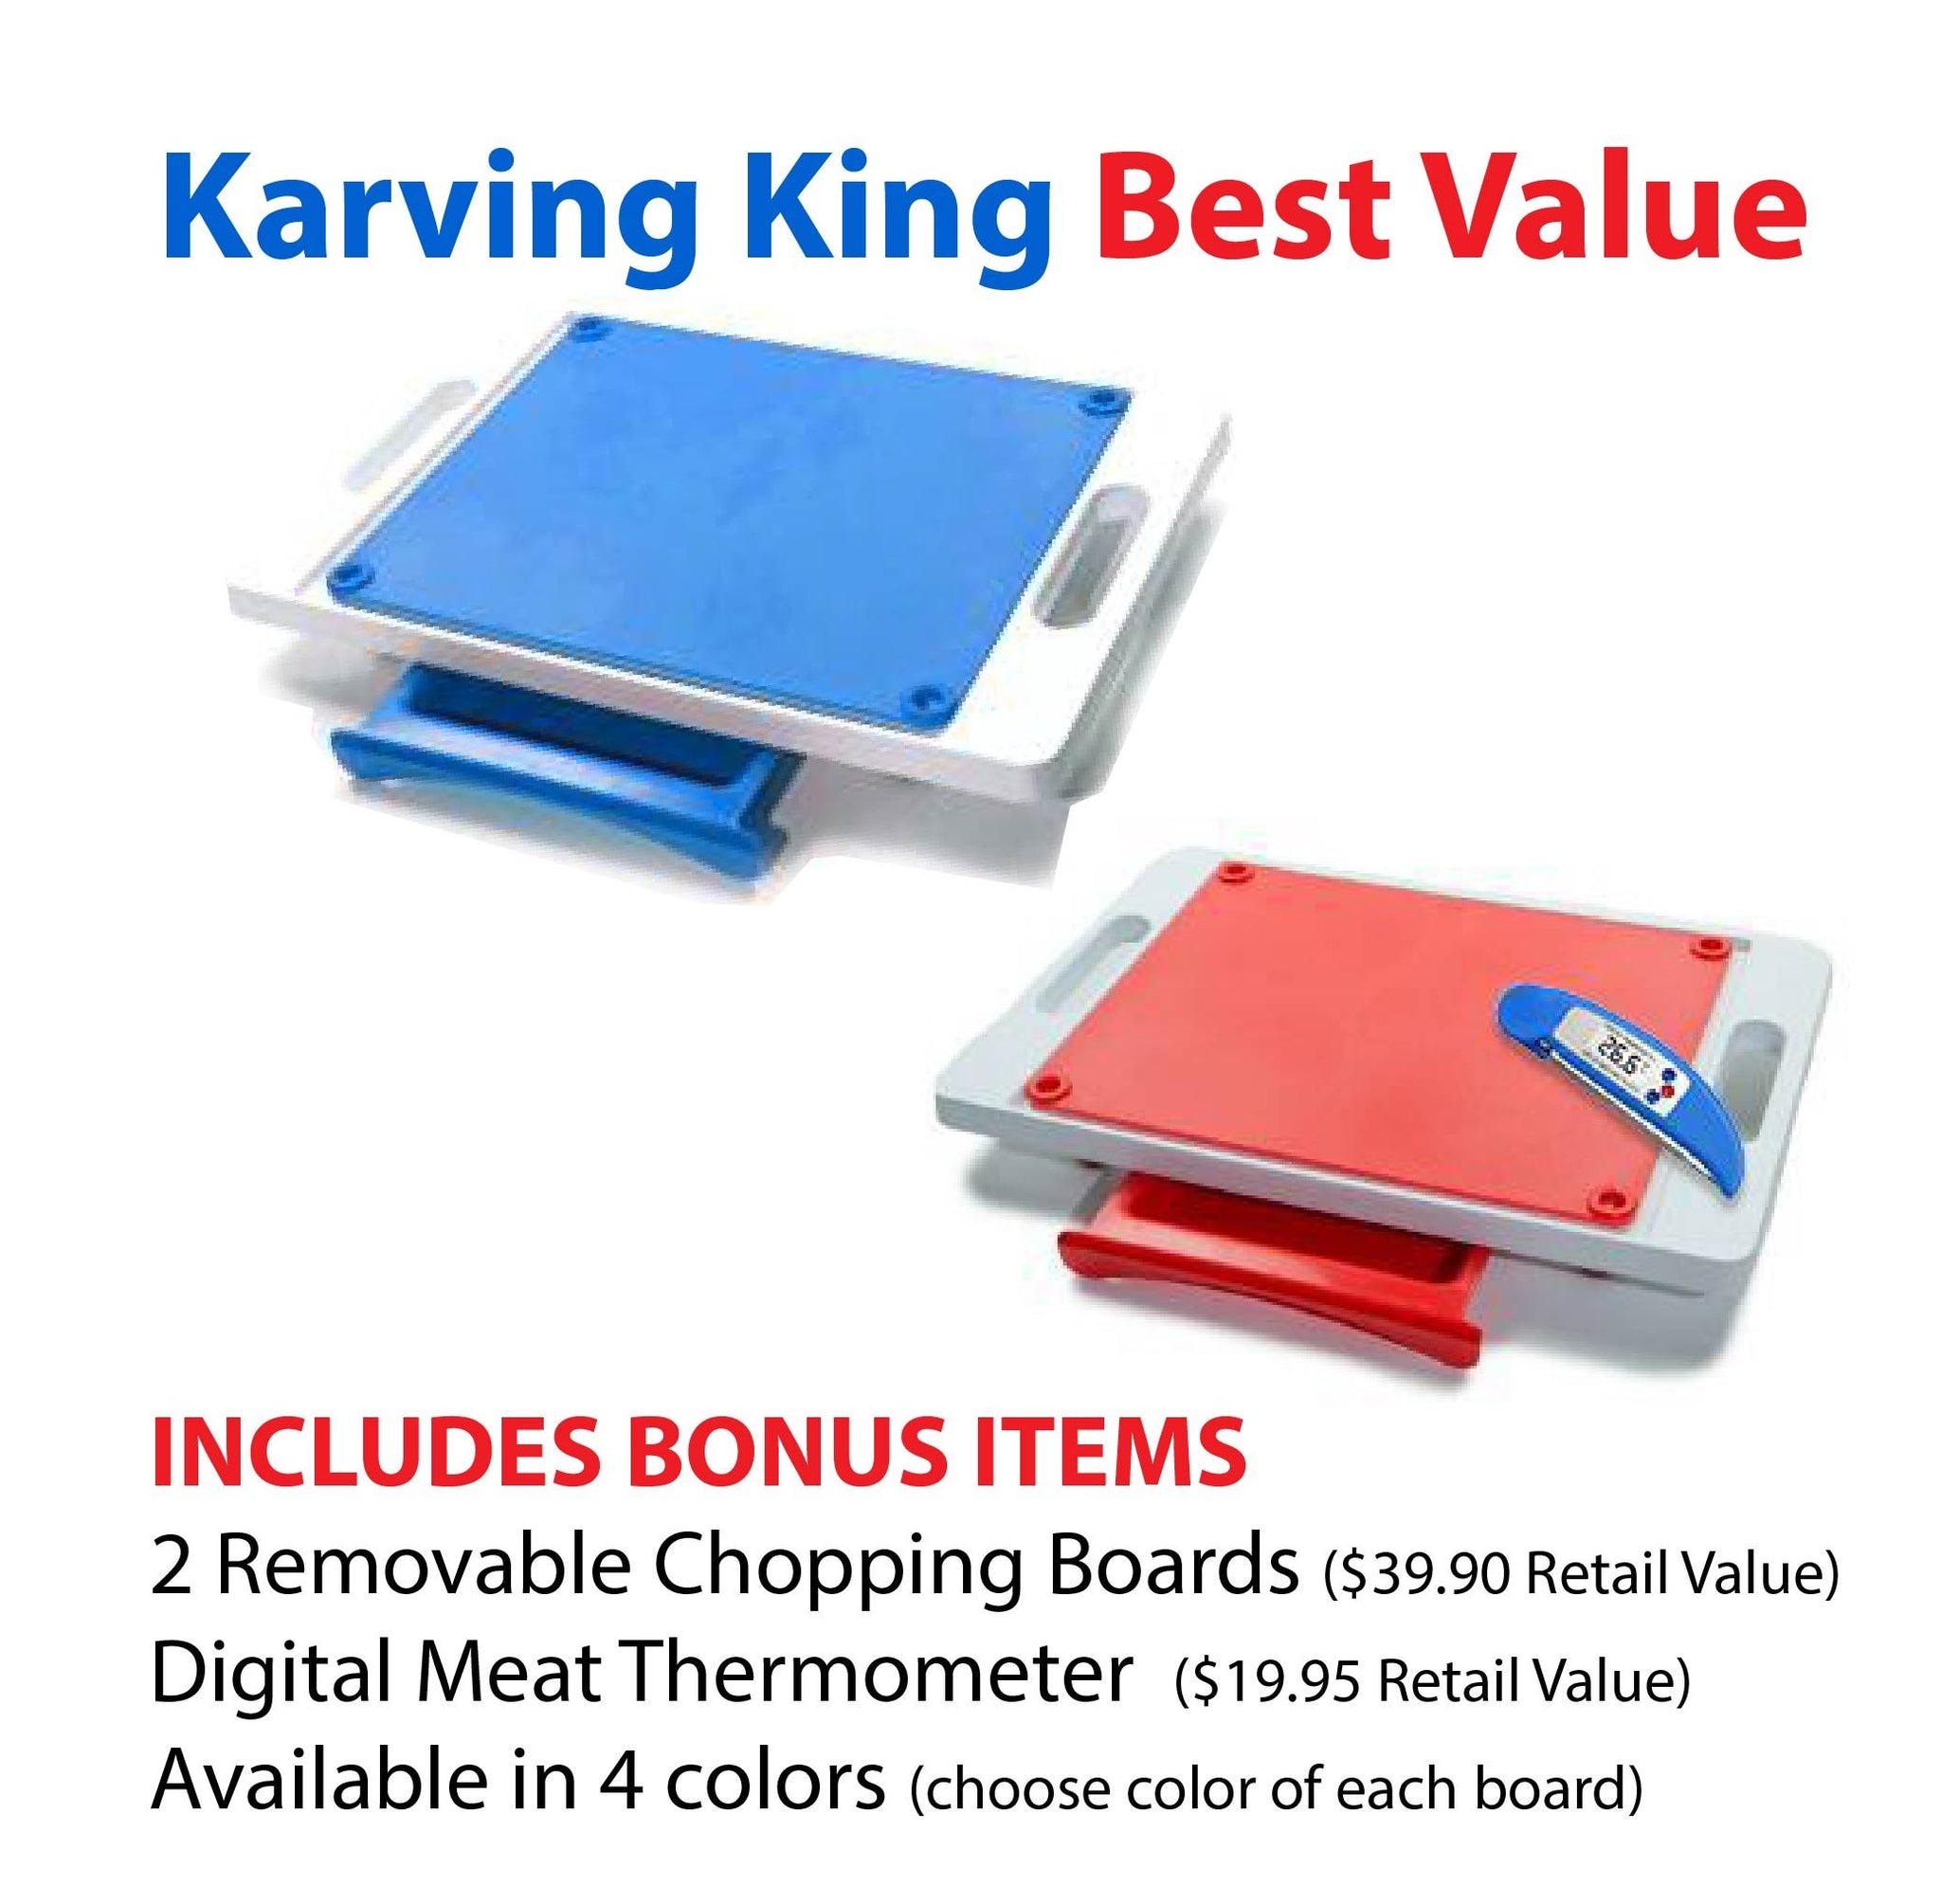 Set of 2 Dripless Cutting Boards 2 In 1 System With Digital Meat Thermometer